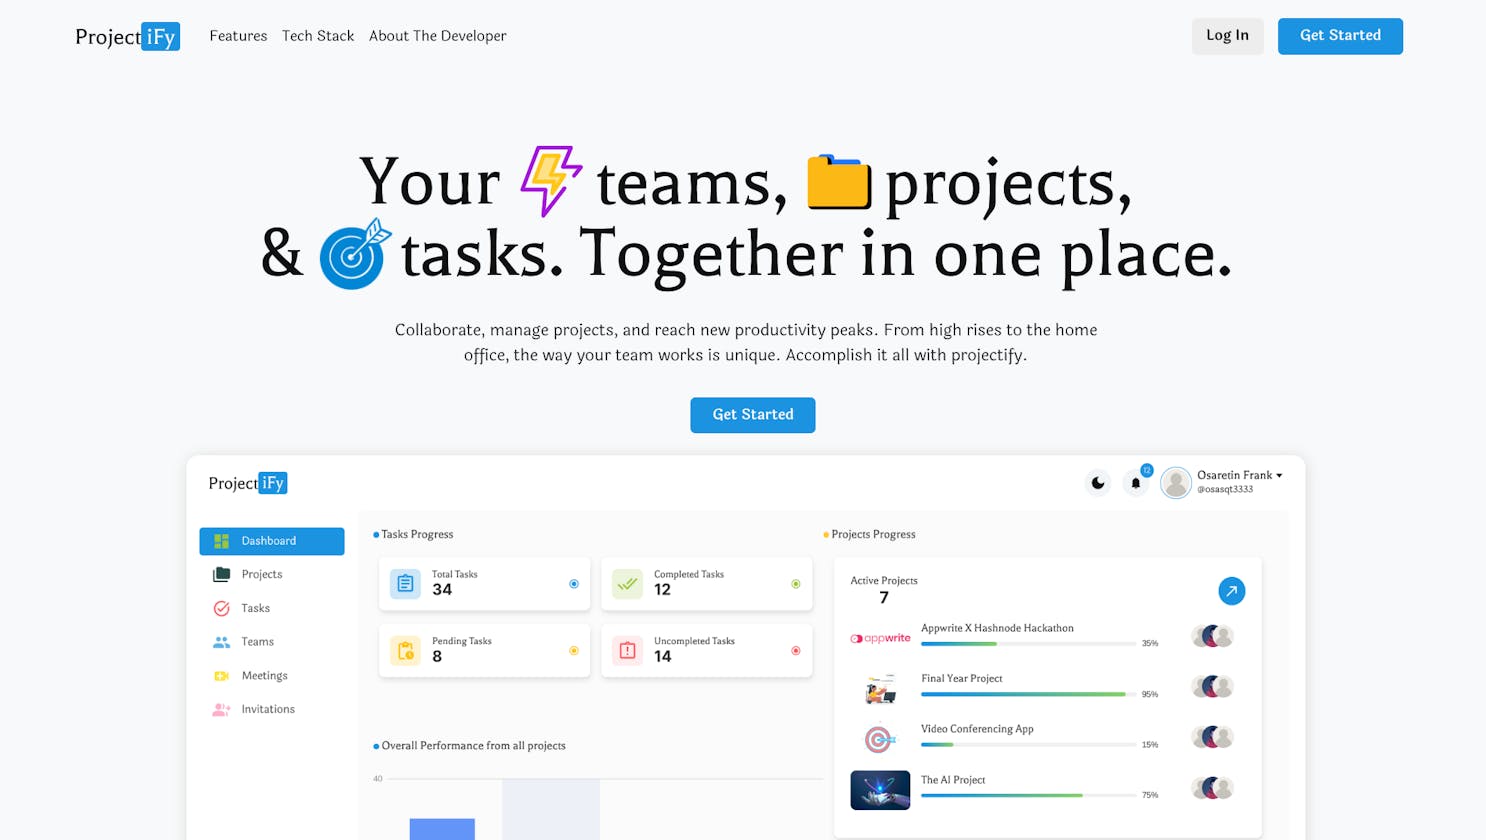 Projectify - Your teams,projects, & tasks. Together in one place.